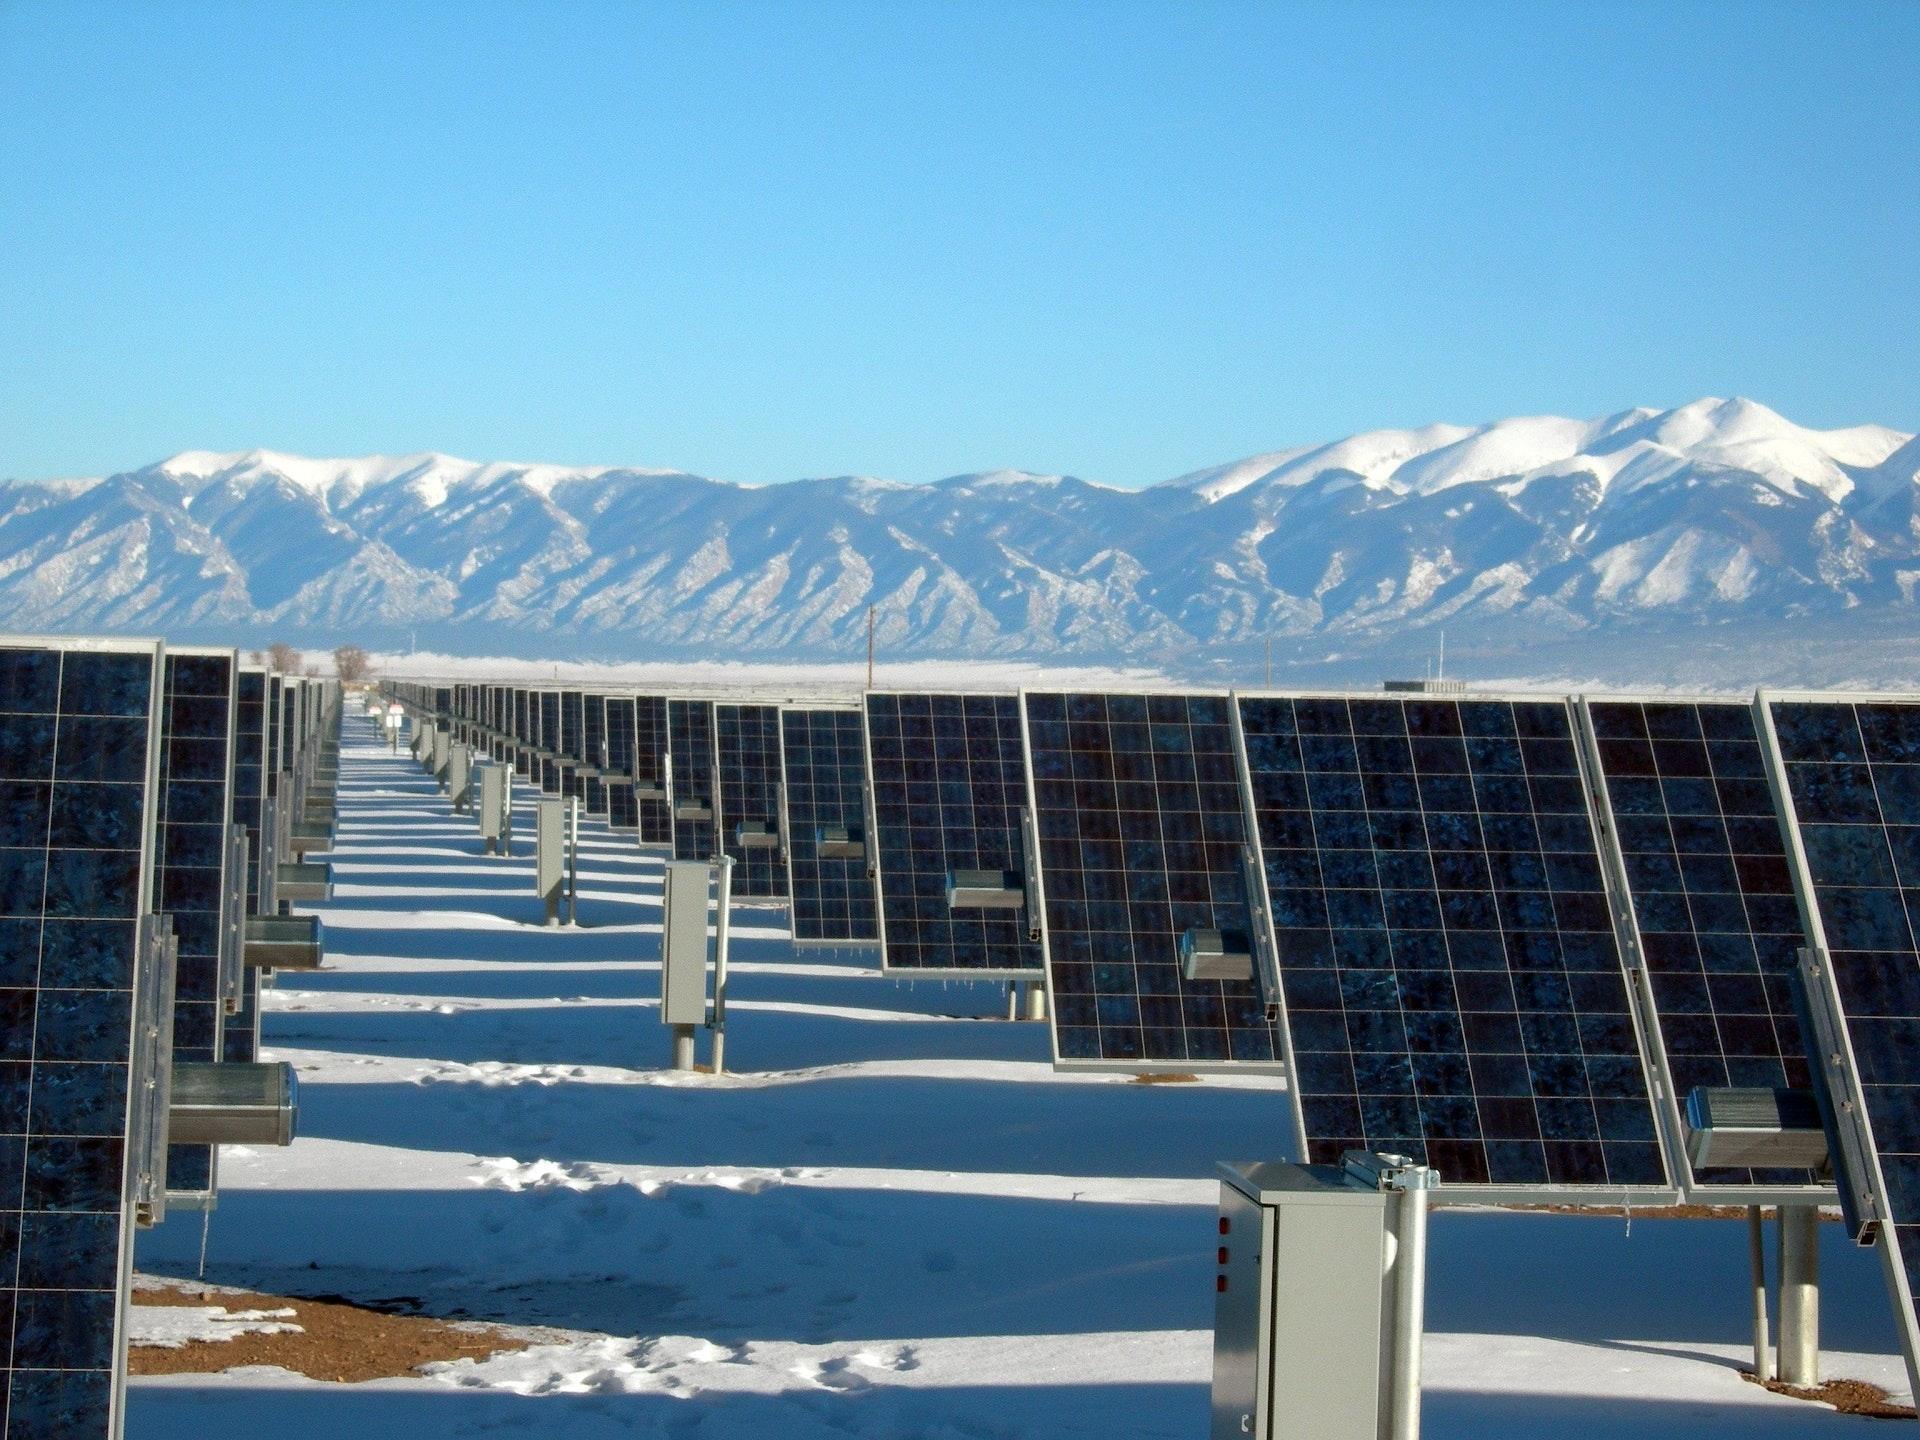 Silver and Black Solar Panels on Snow Covered Ground · Free